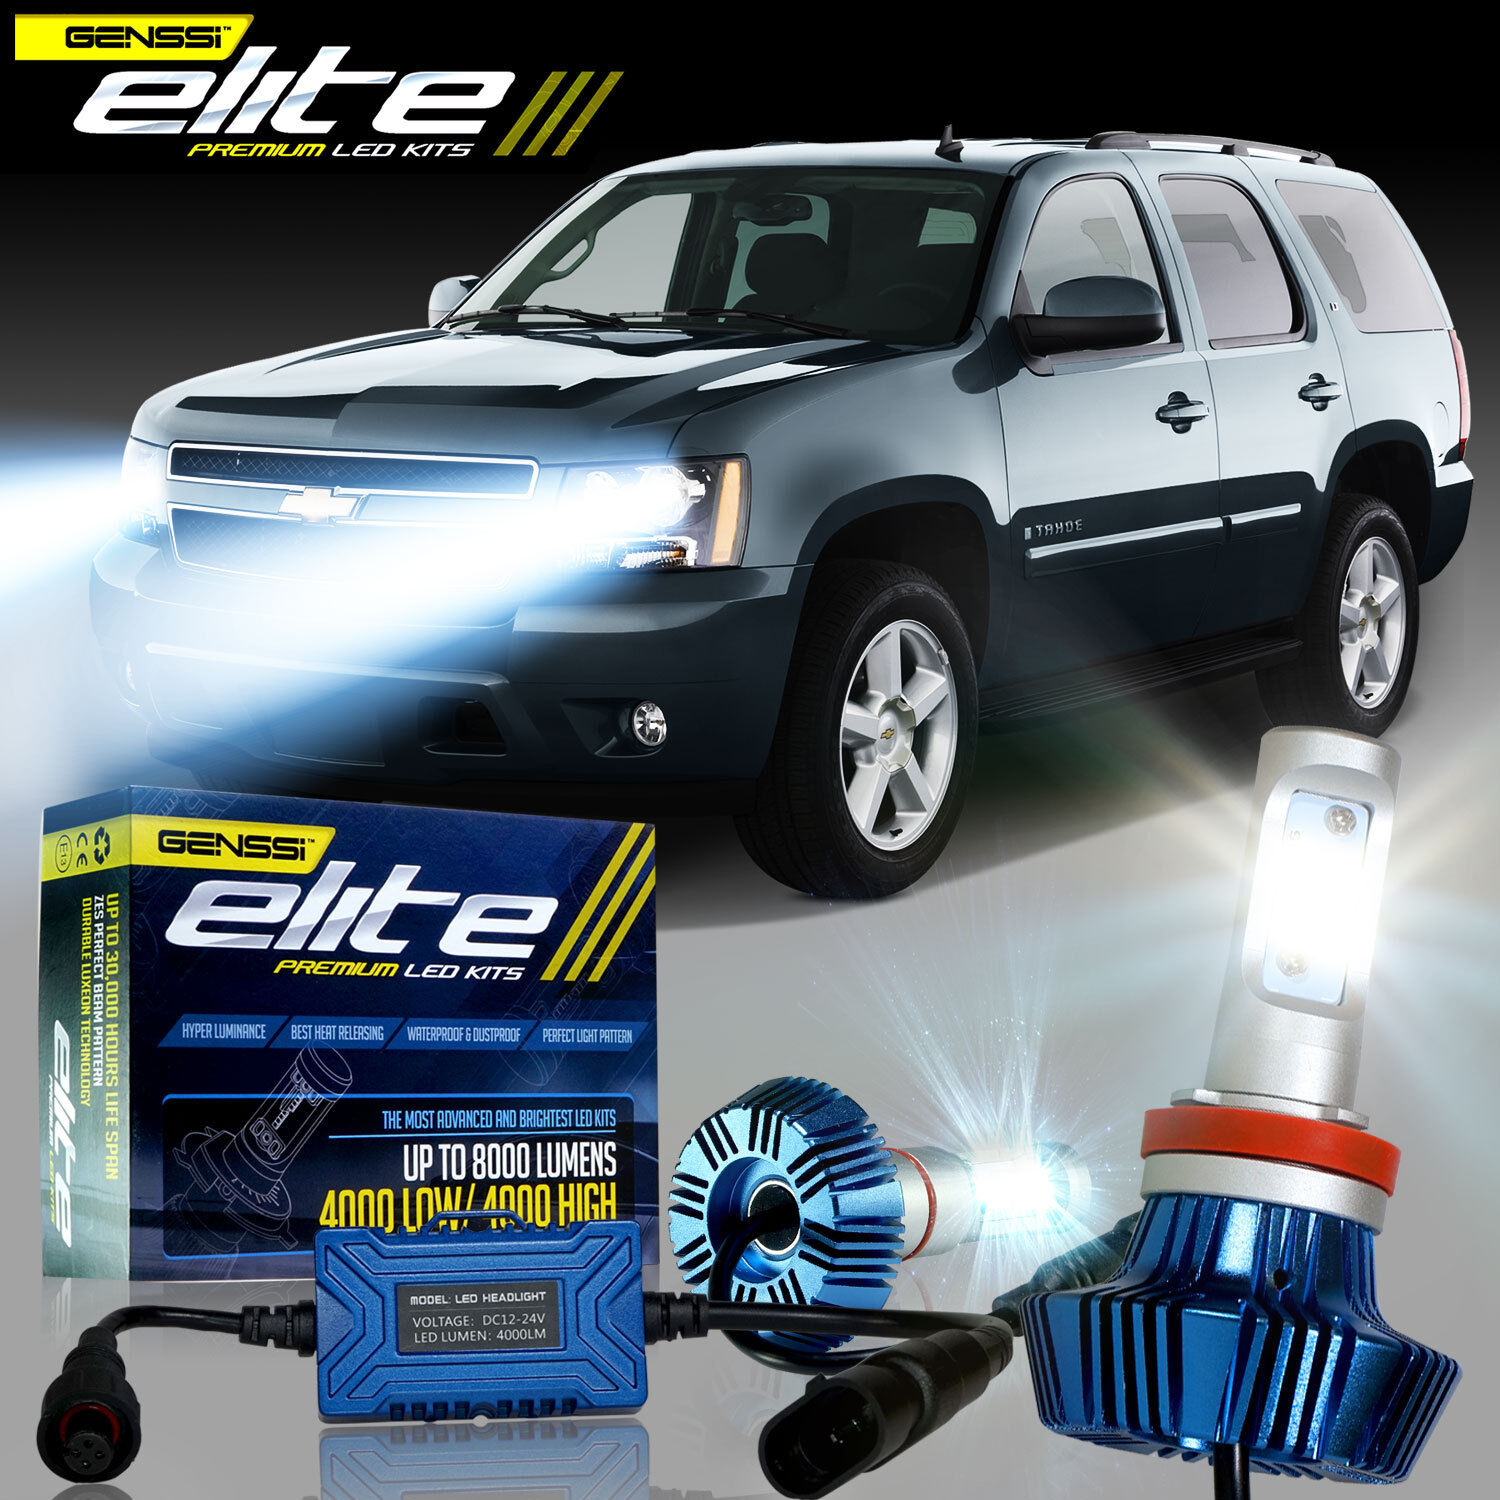 Authentic G7 Elite LED Headlight Kit for 07 to 2017 Chevy Tahoe Low Beam Only